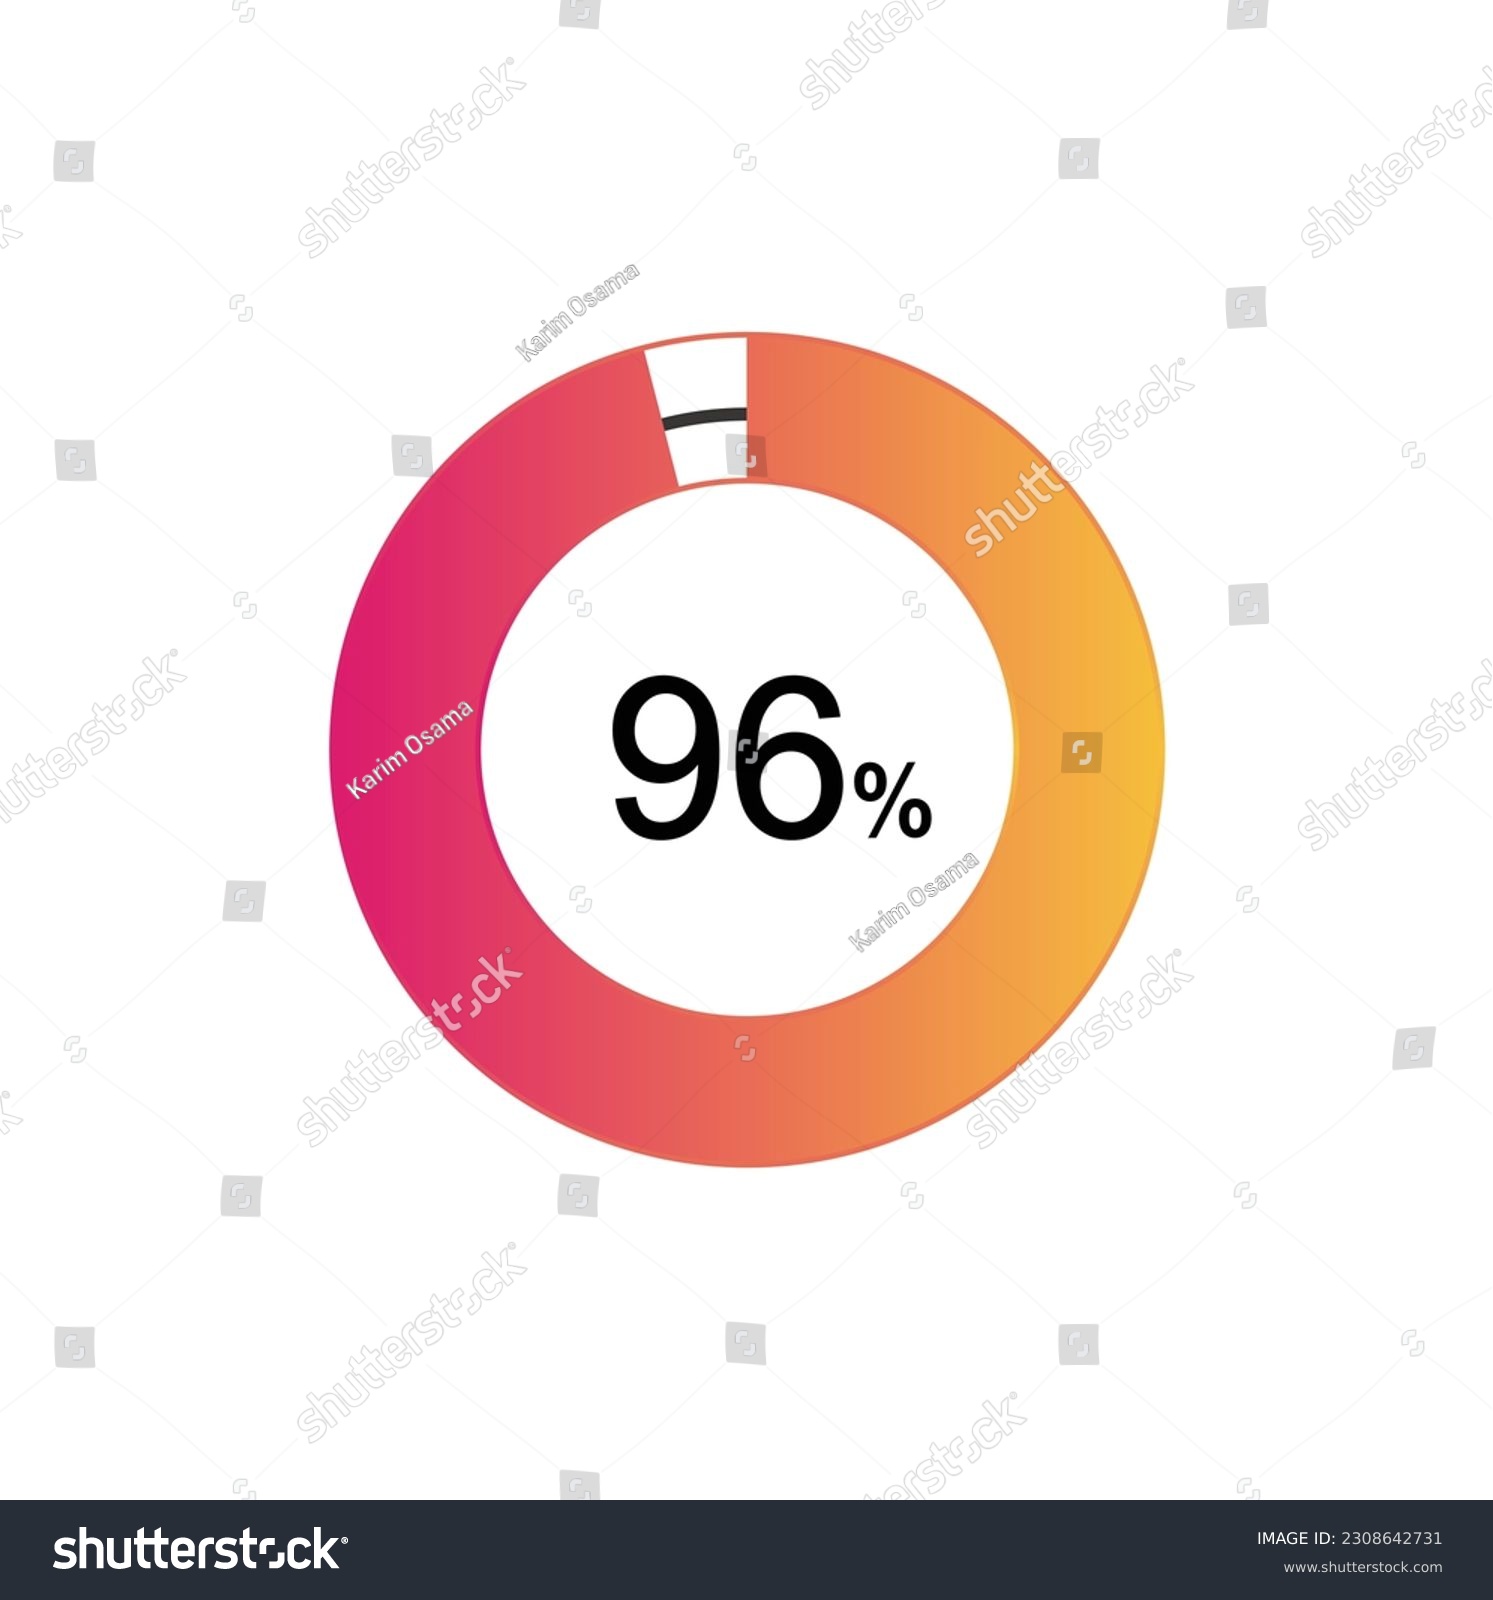 SVG of 96 Percentage diagrams, pie chart for Your documents, reports, 96% circle percentage diagrams for infographics. svg